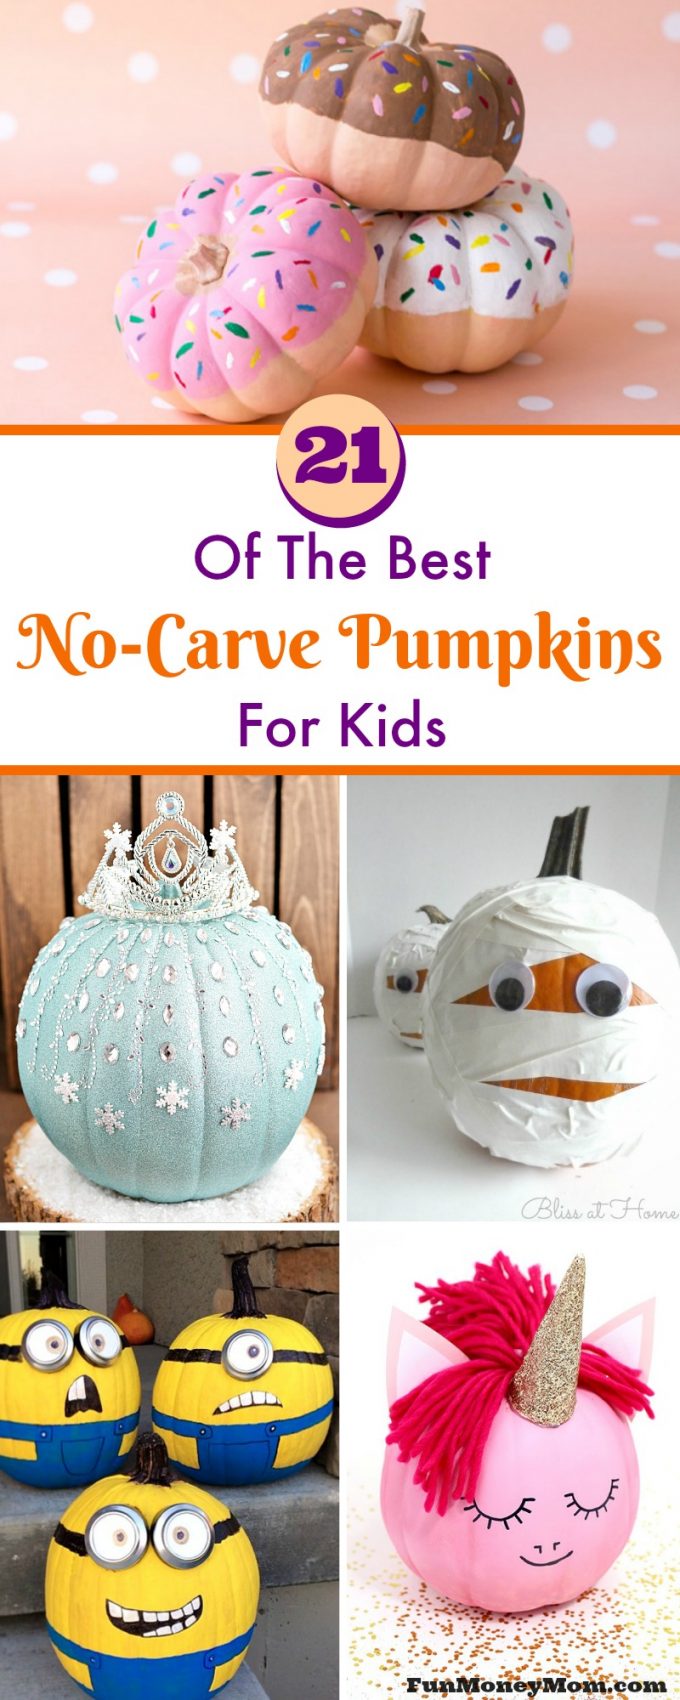 Ready to get started on your Halloween decorations? The kids are going to love these super cute no carve pumpkins!